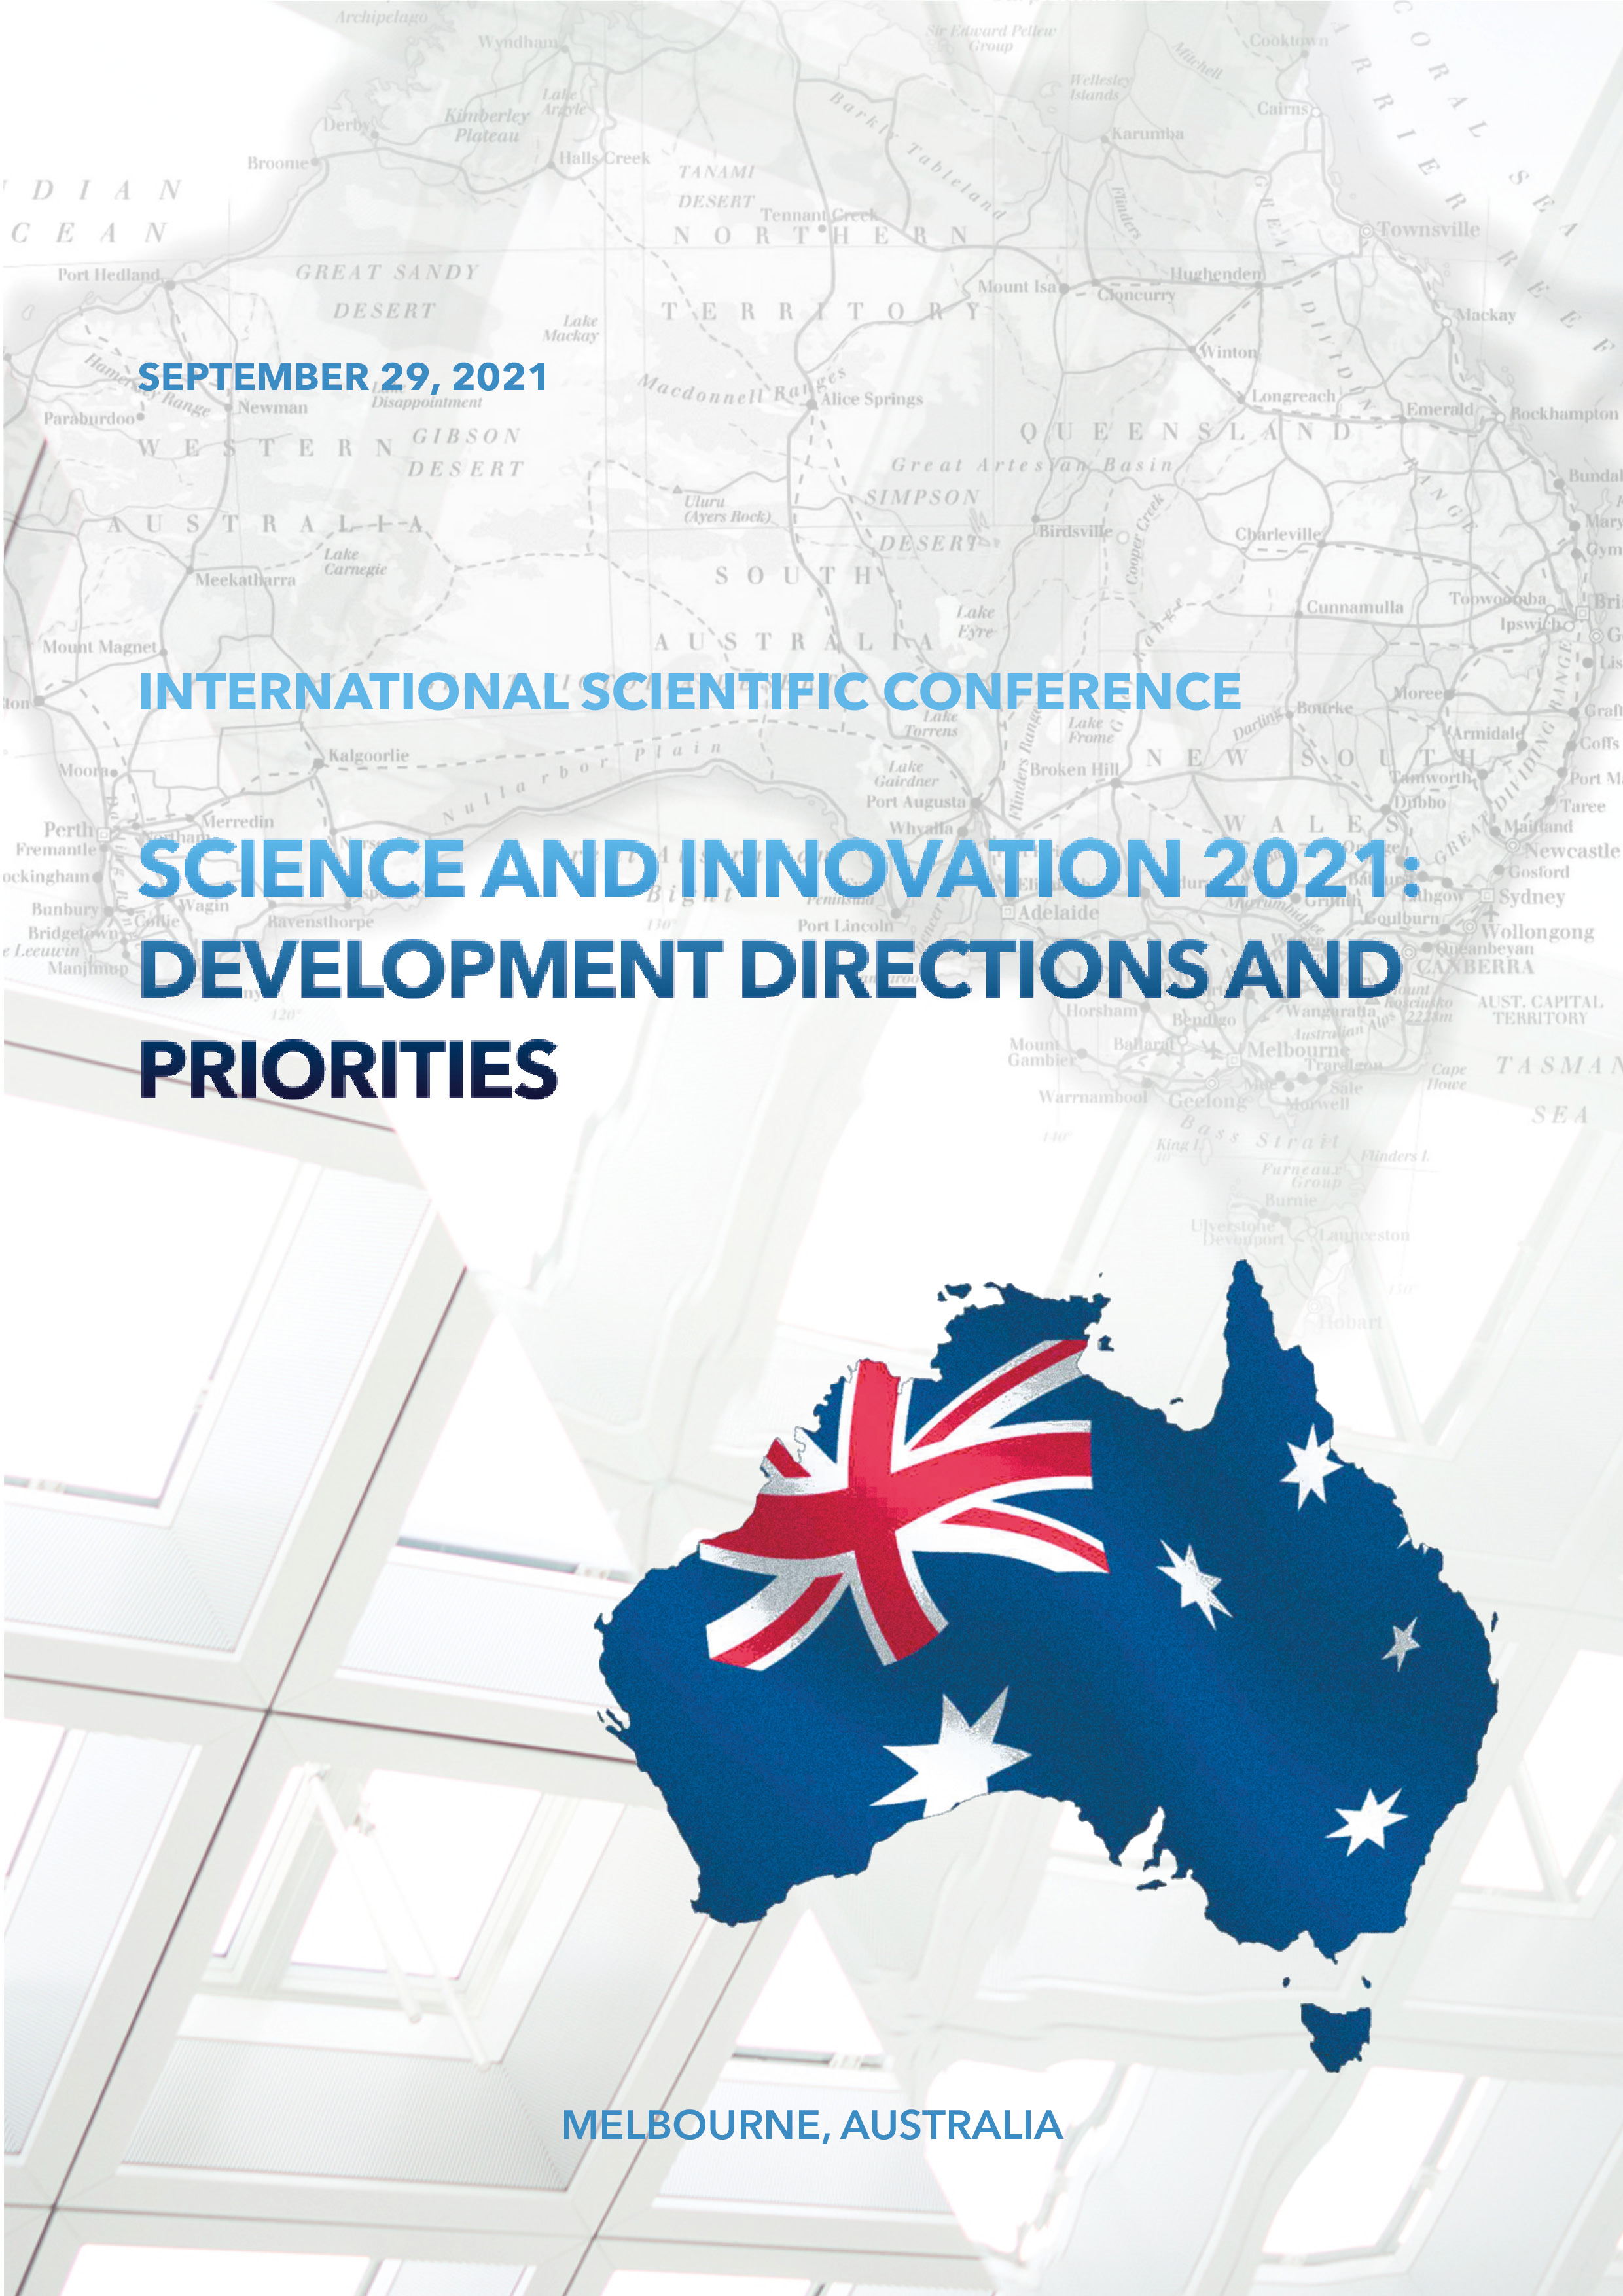             Science and innovations 2021: development directions and priorities. September 29, 2021. Melbourne, Australia.
    